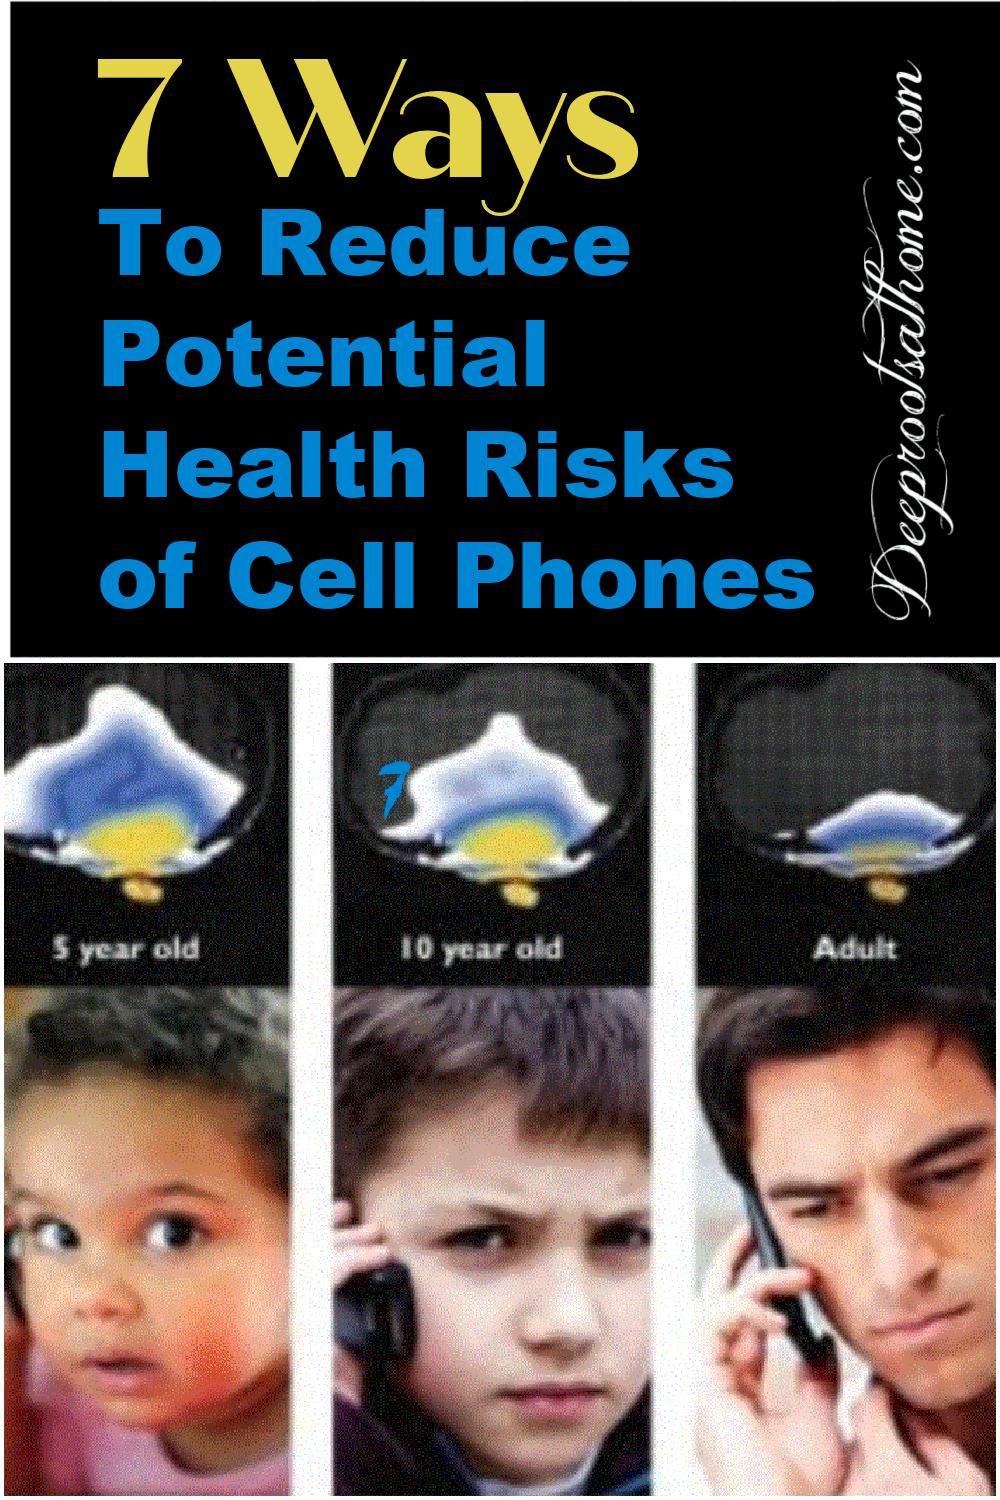 7 Ways To Reduce Potential Health Risks of Cell Phones. 